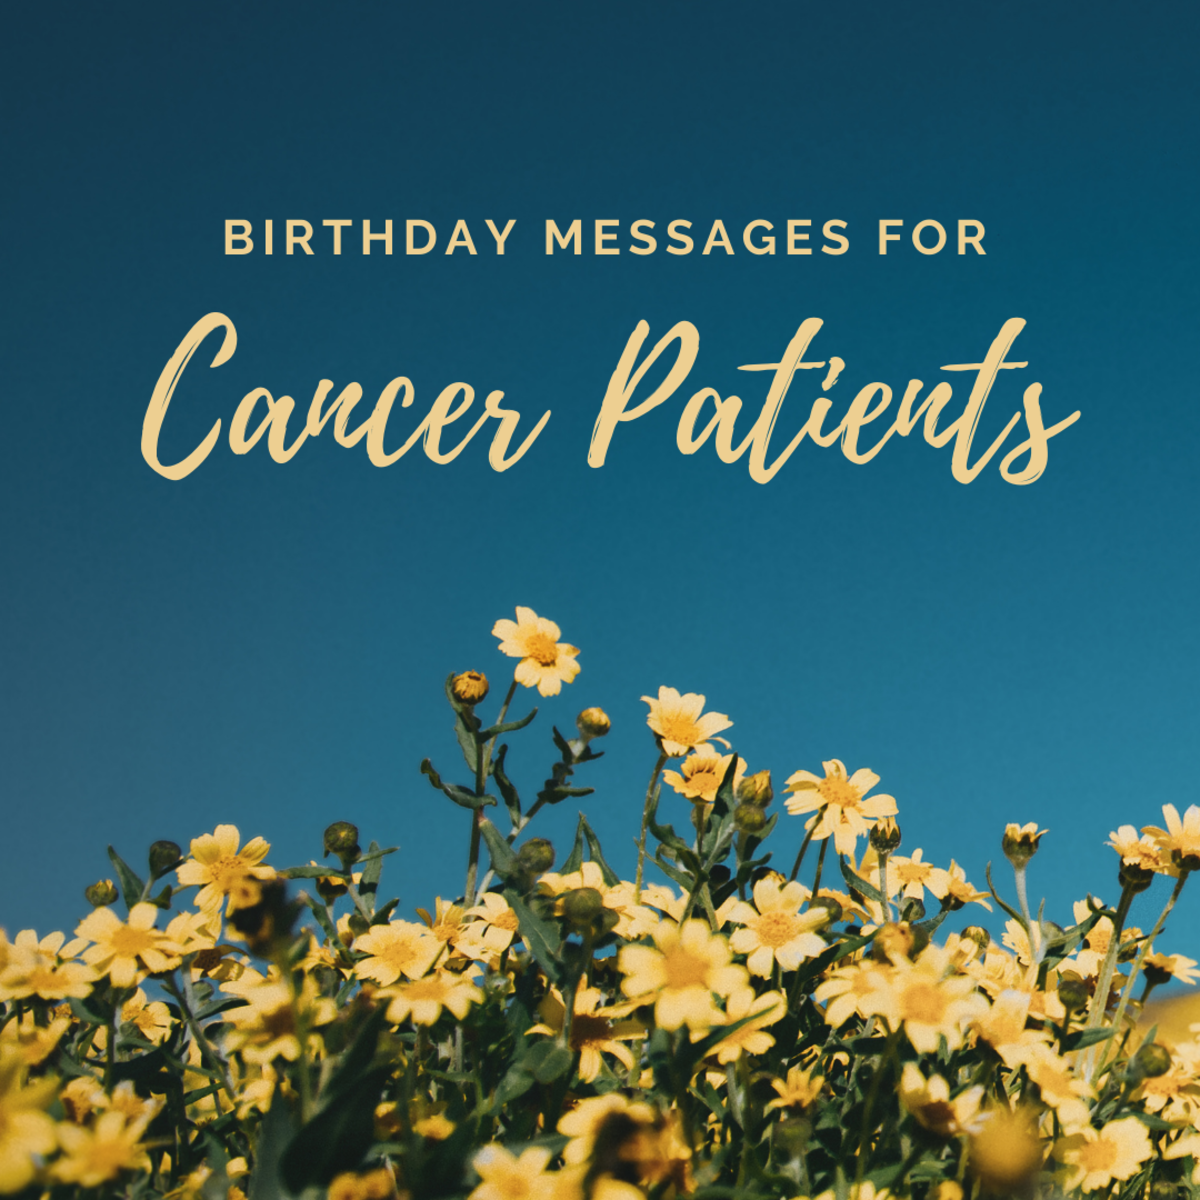 Happy Birthday Wishes for Someone With Cancer